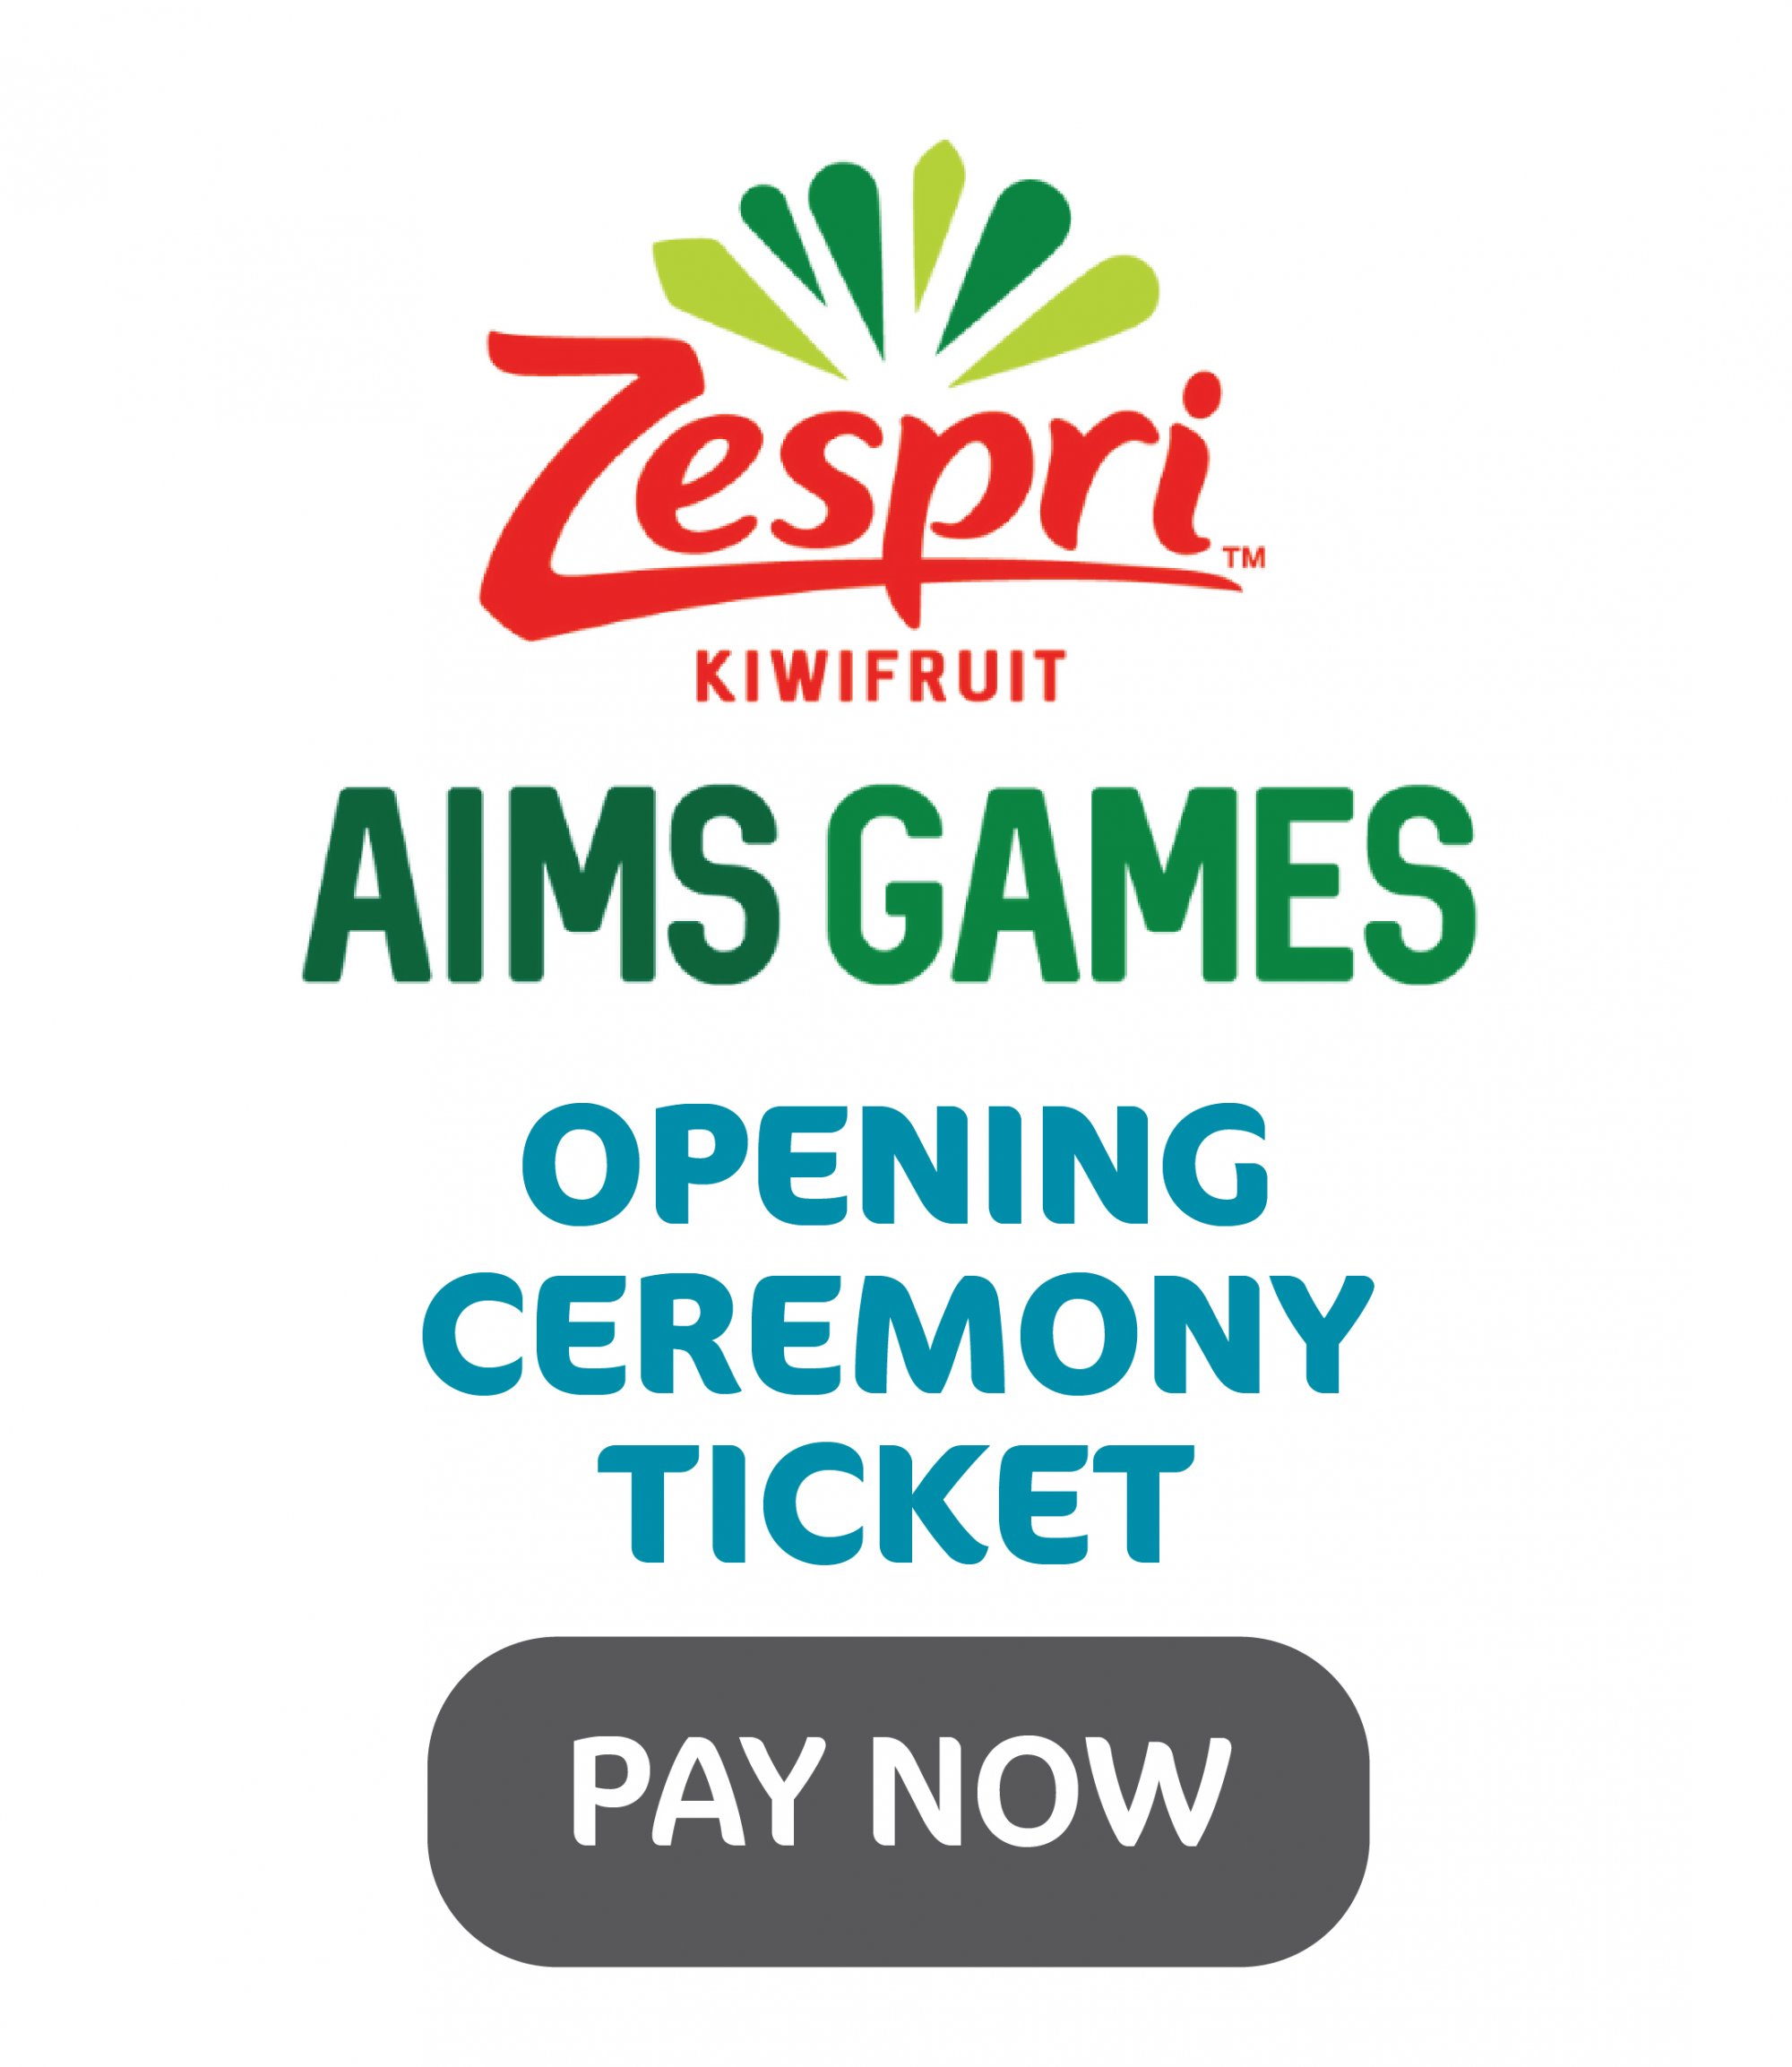 Aims Games icons_Opening Ceremony Ticket.jpg